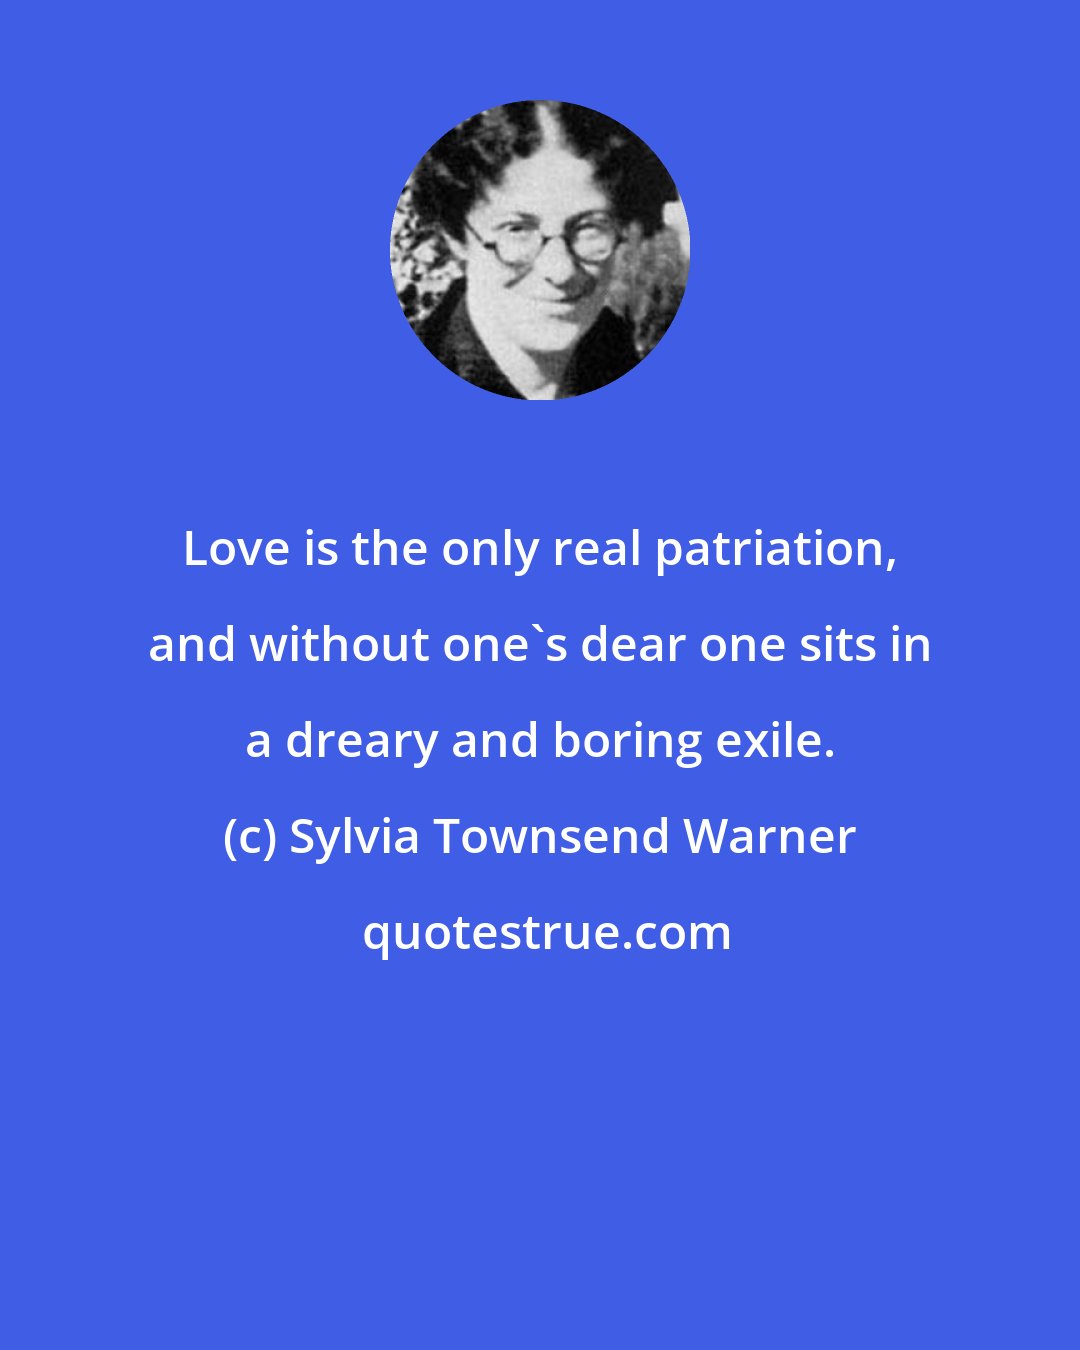 Sylvia Townsend Warner: Love is the only real patriation, and without one's dear one sits in a dreary and boring exile.